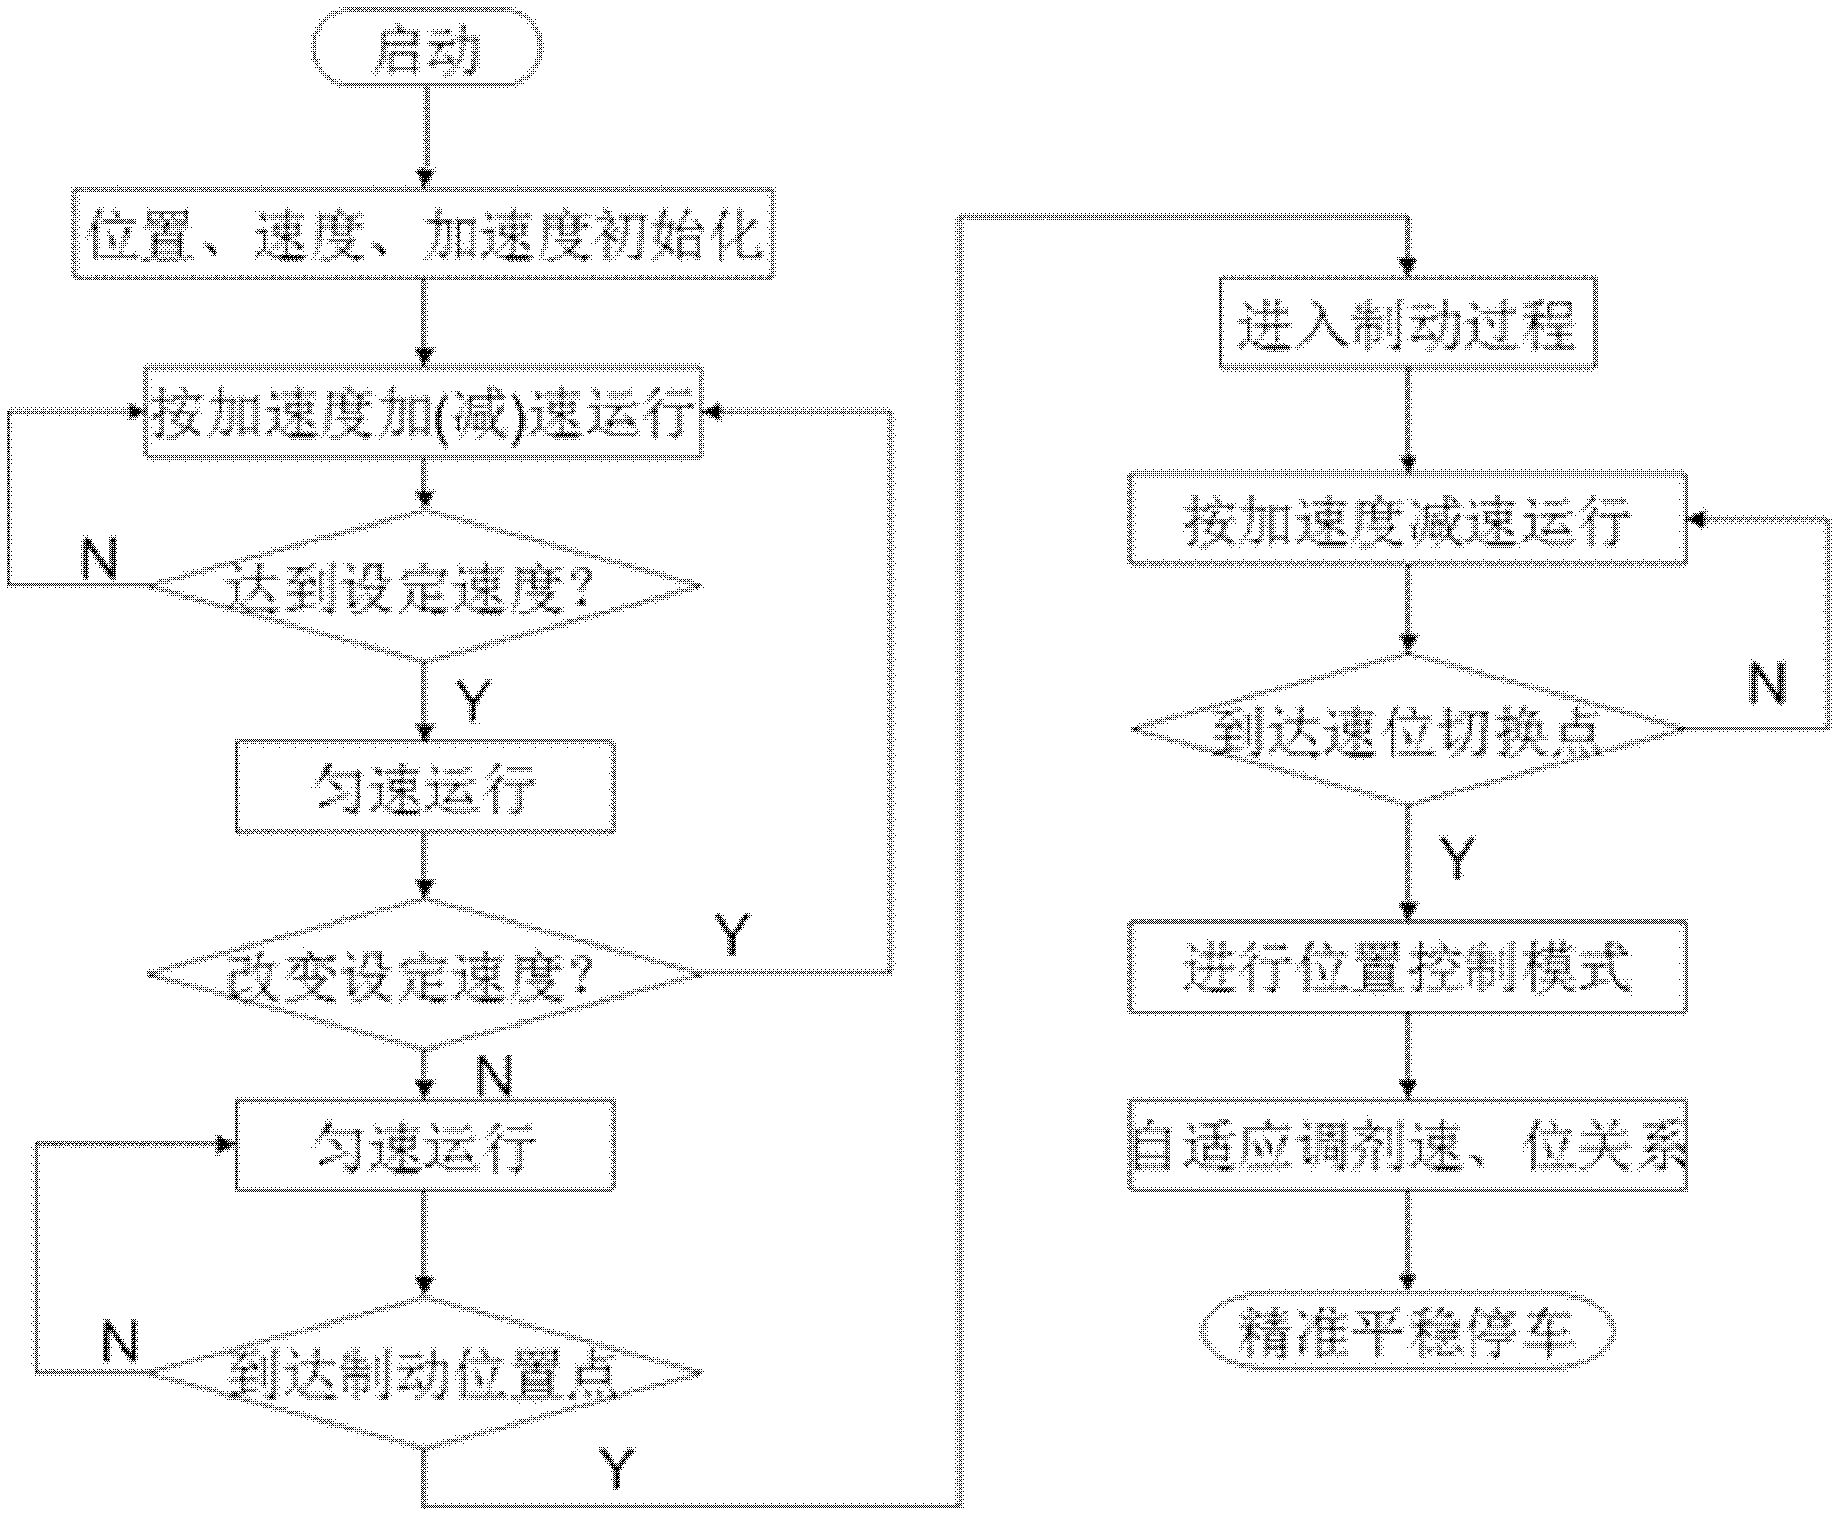 Multi-target cooperative intelligent controller for track traffic and method adopted by same